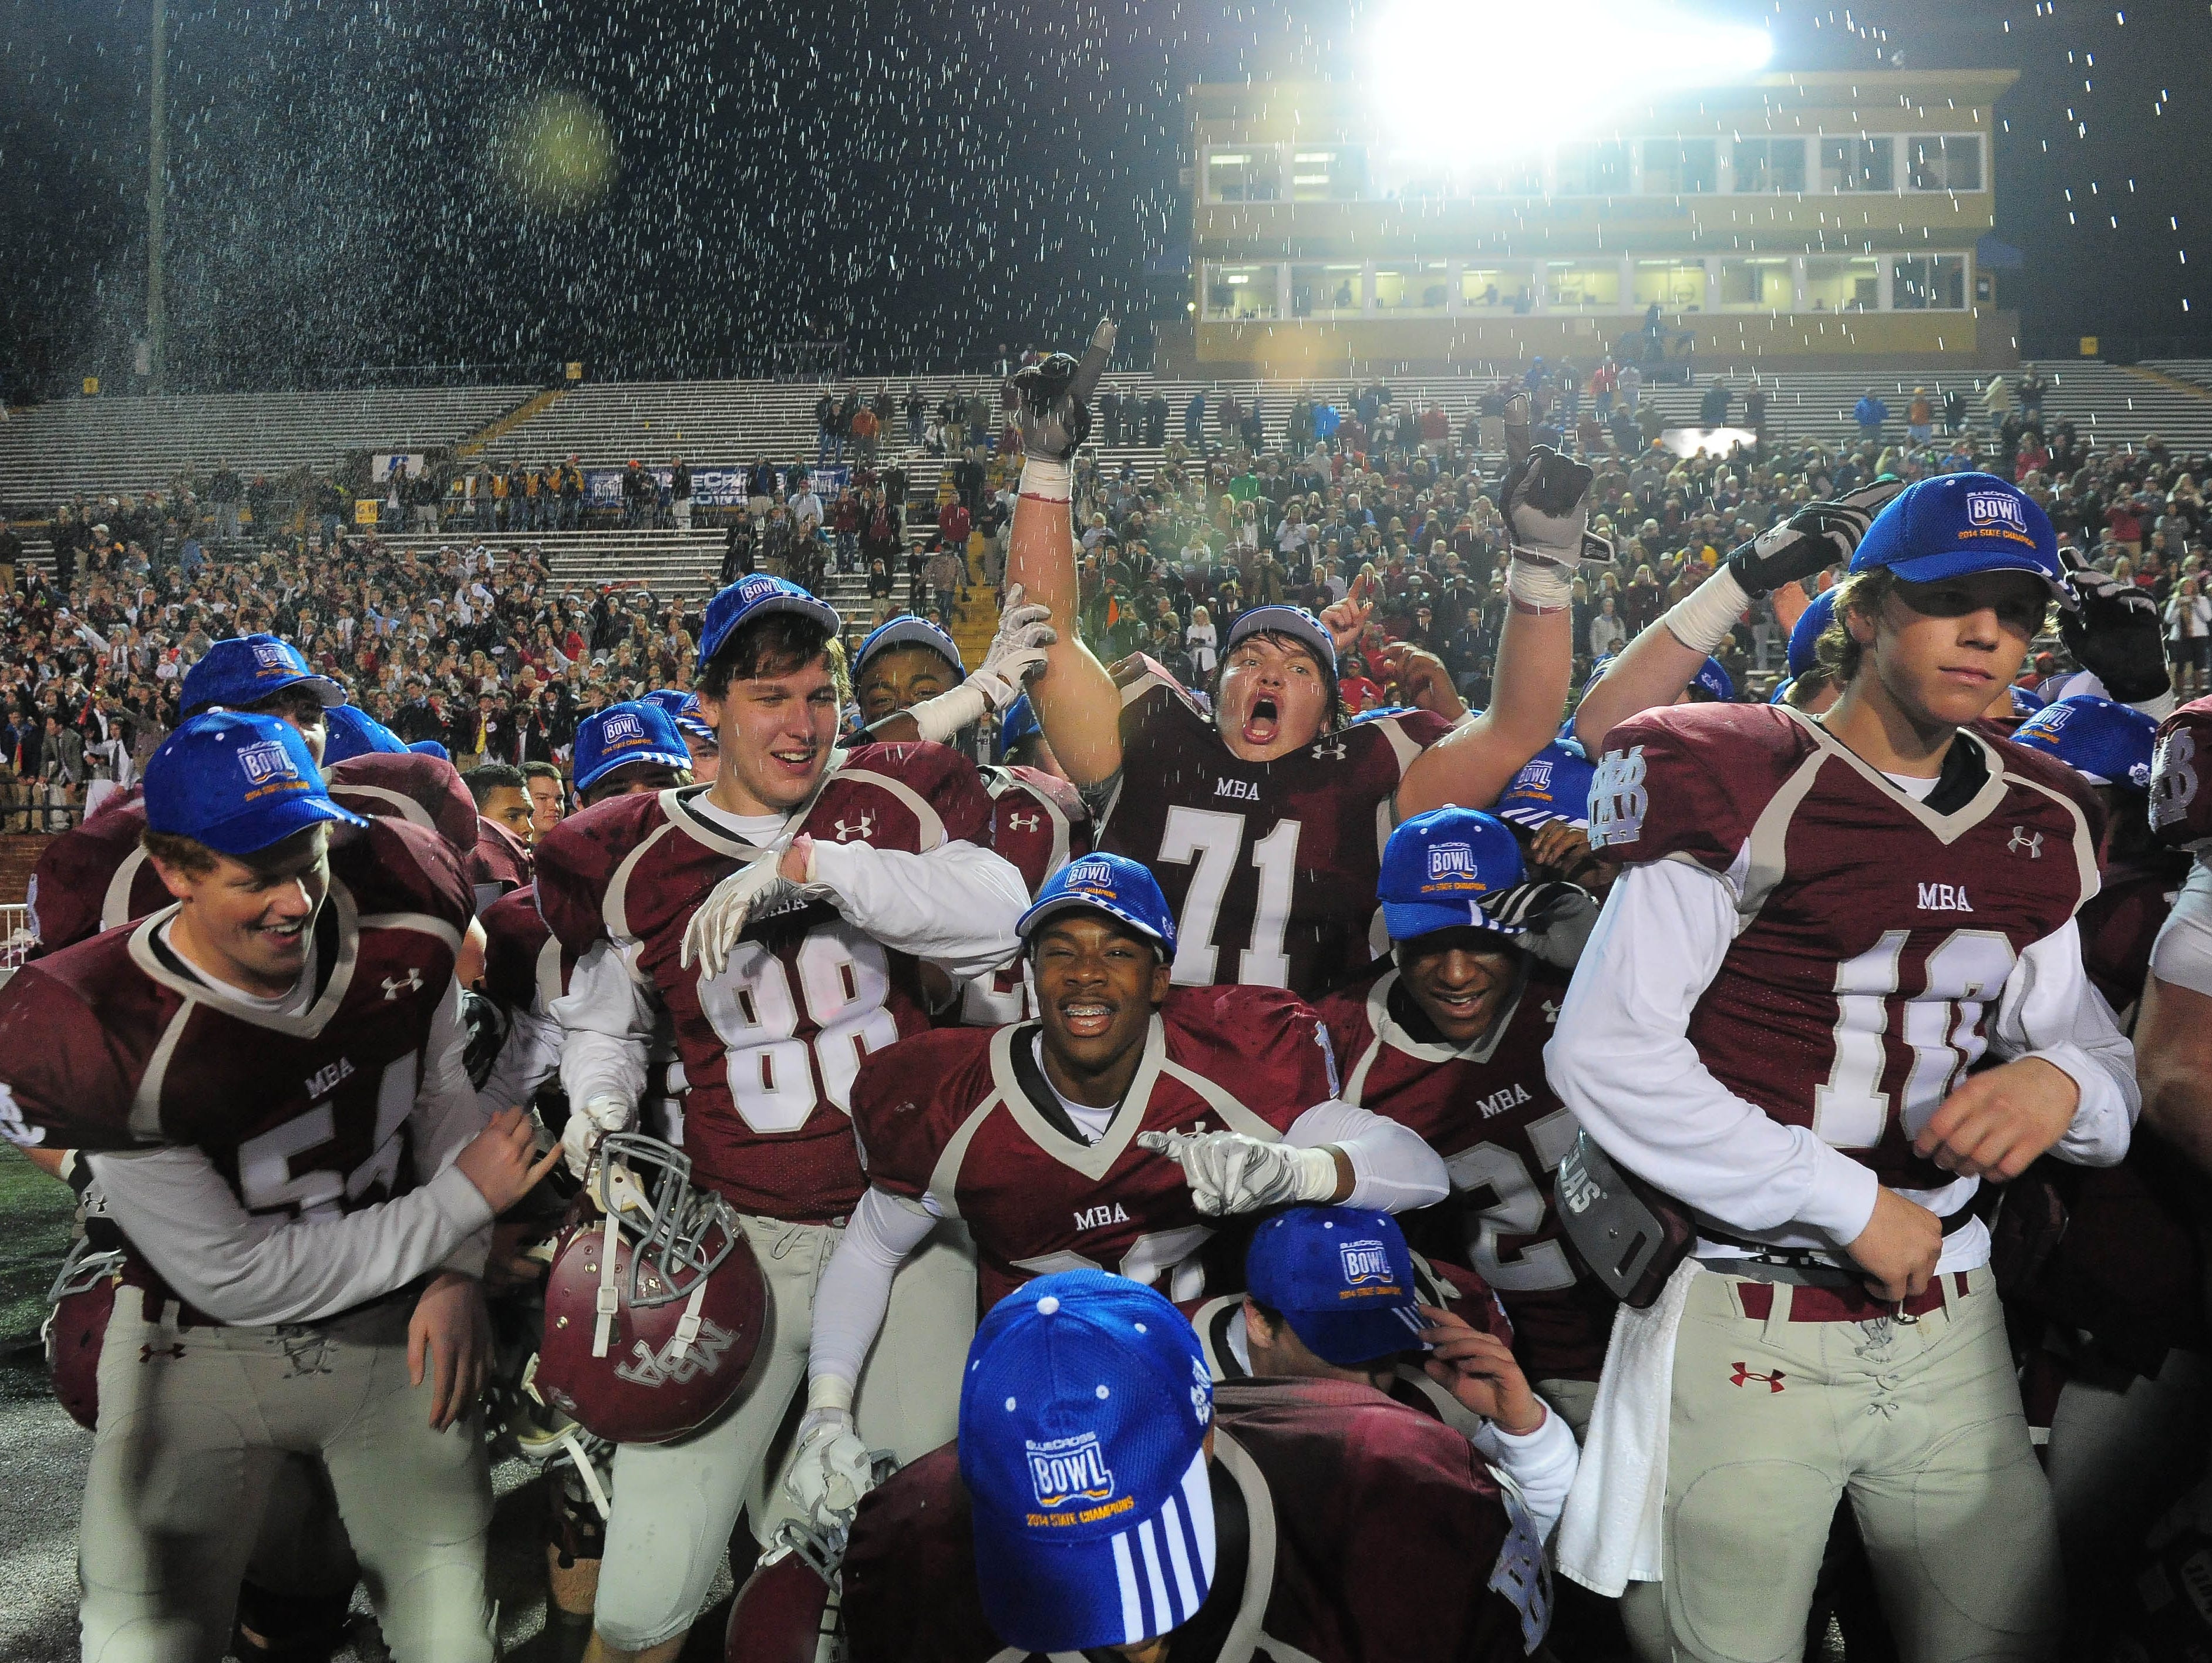 MBA players celebrate a 10-7 win over Ensworth for the Division II-AA state championship last December. Montgomery Bell Academy players celebrate their 10-7 win over Ensworth for the Division II-AA state championship last December.